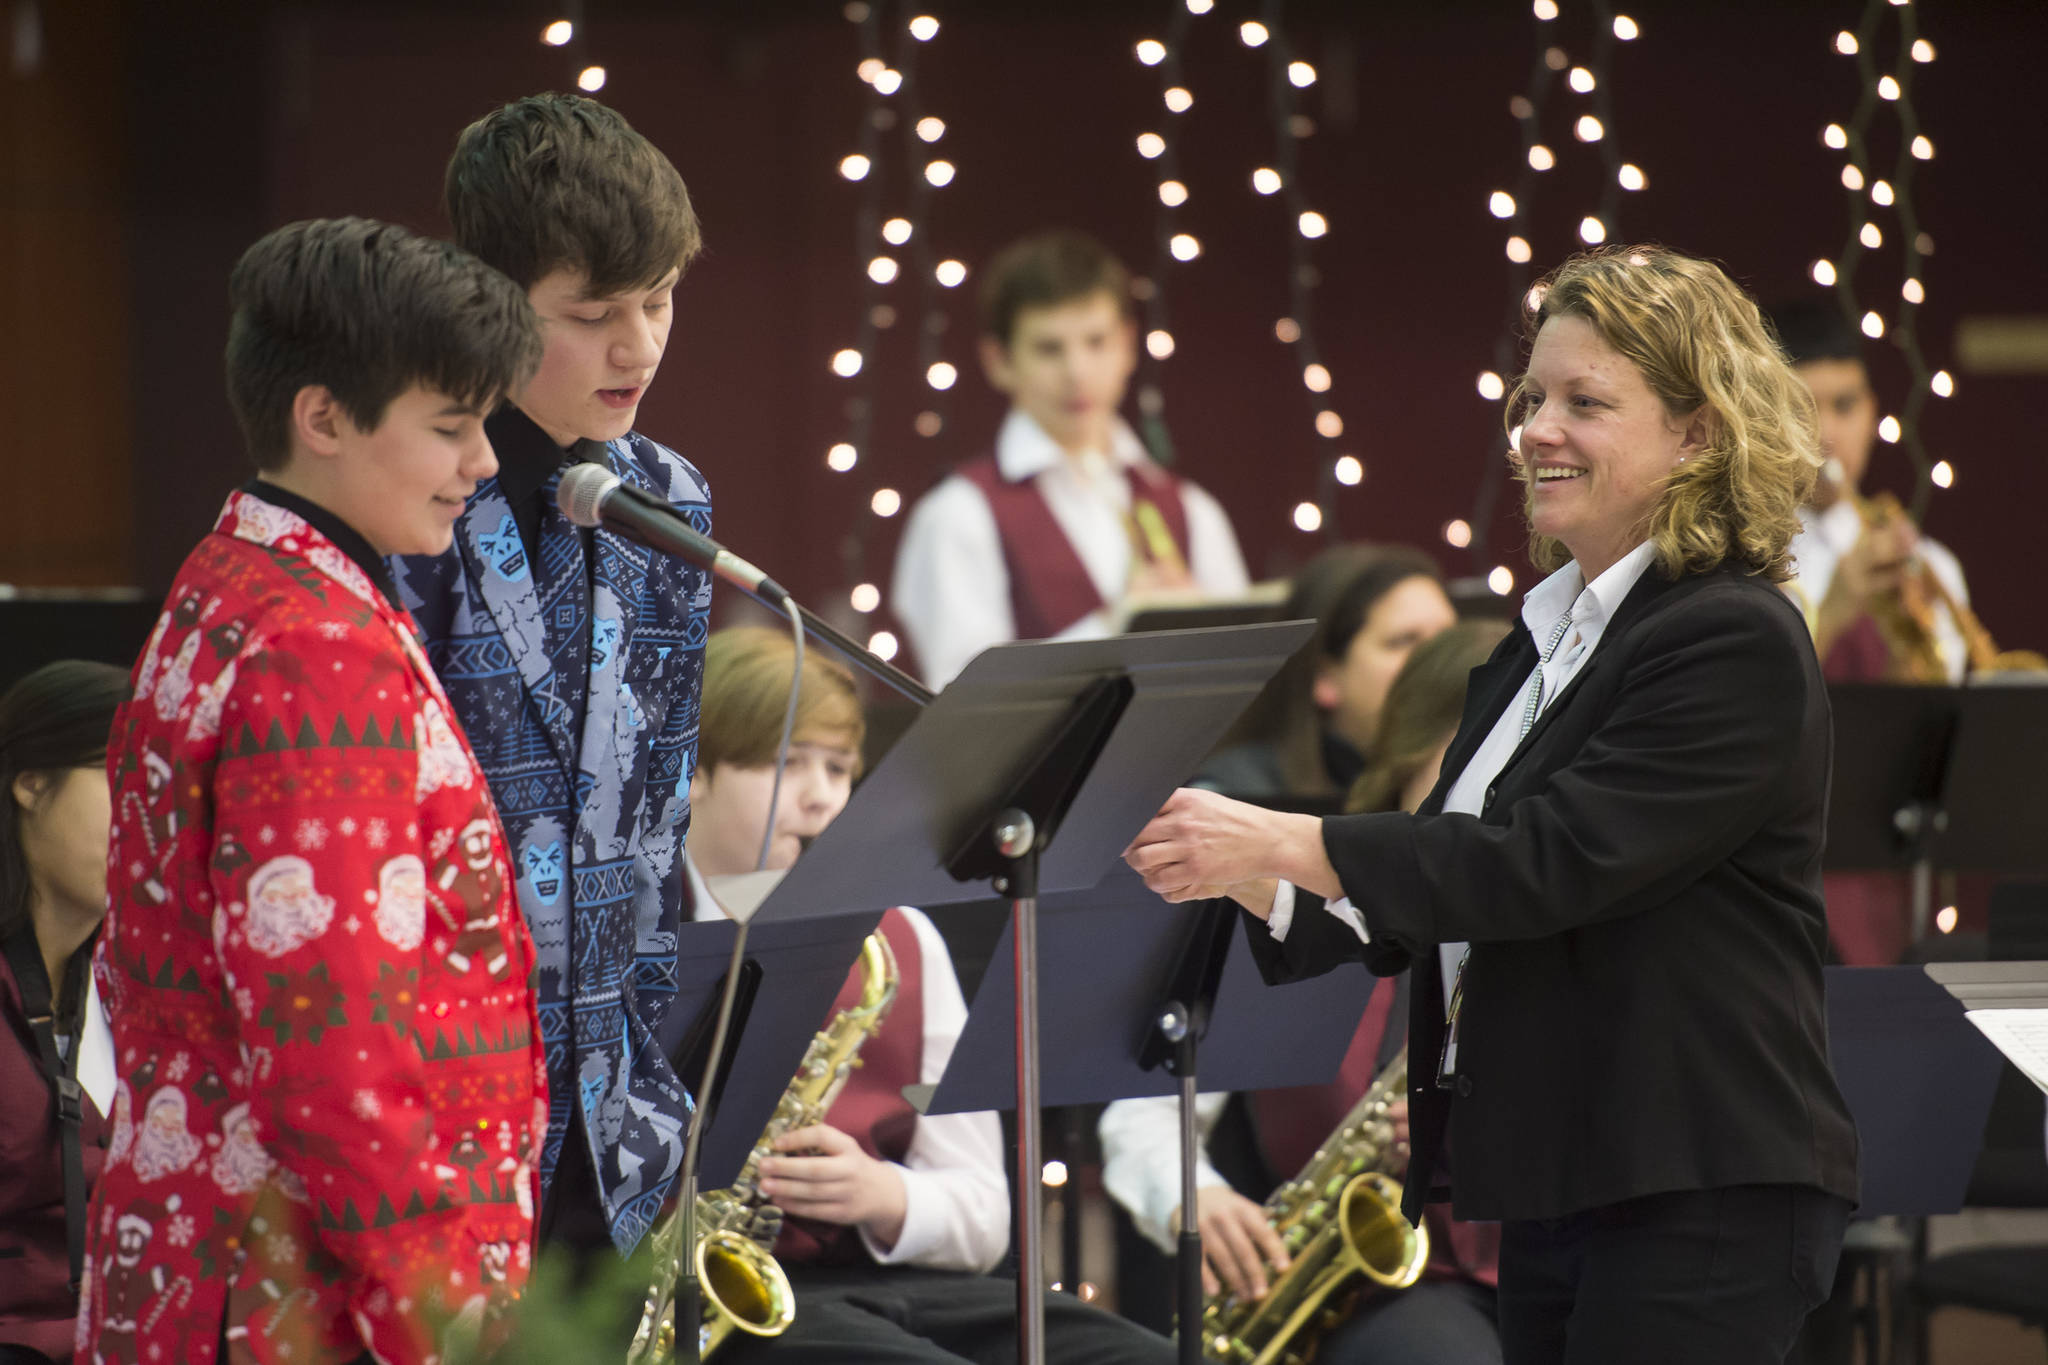 Band Director Amy Bibb adjusts the microphone as freshman Toby Russell, left, and senior Dakota Morgan sing with the Juneau-Douglas High School Jazz Band during a holiday music concert at JDHS on Thursday, December 2018. (Michael Penn | Juneau Empire File)